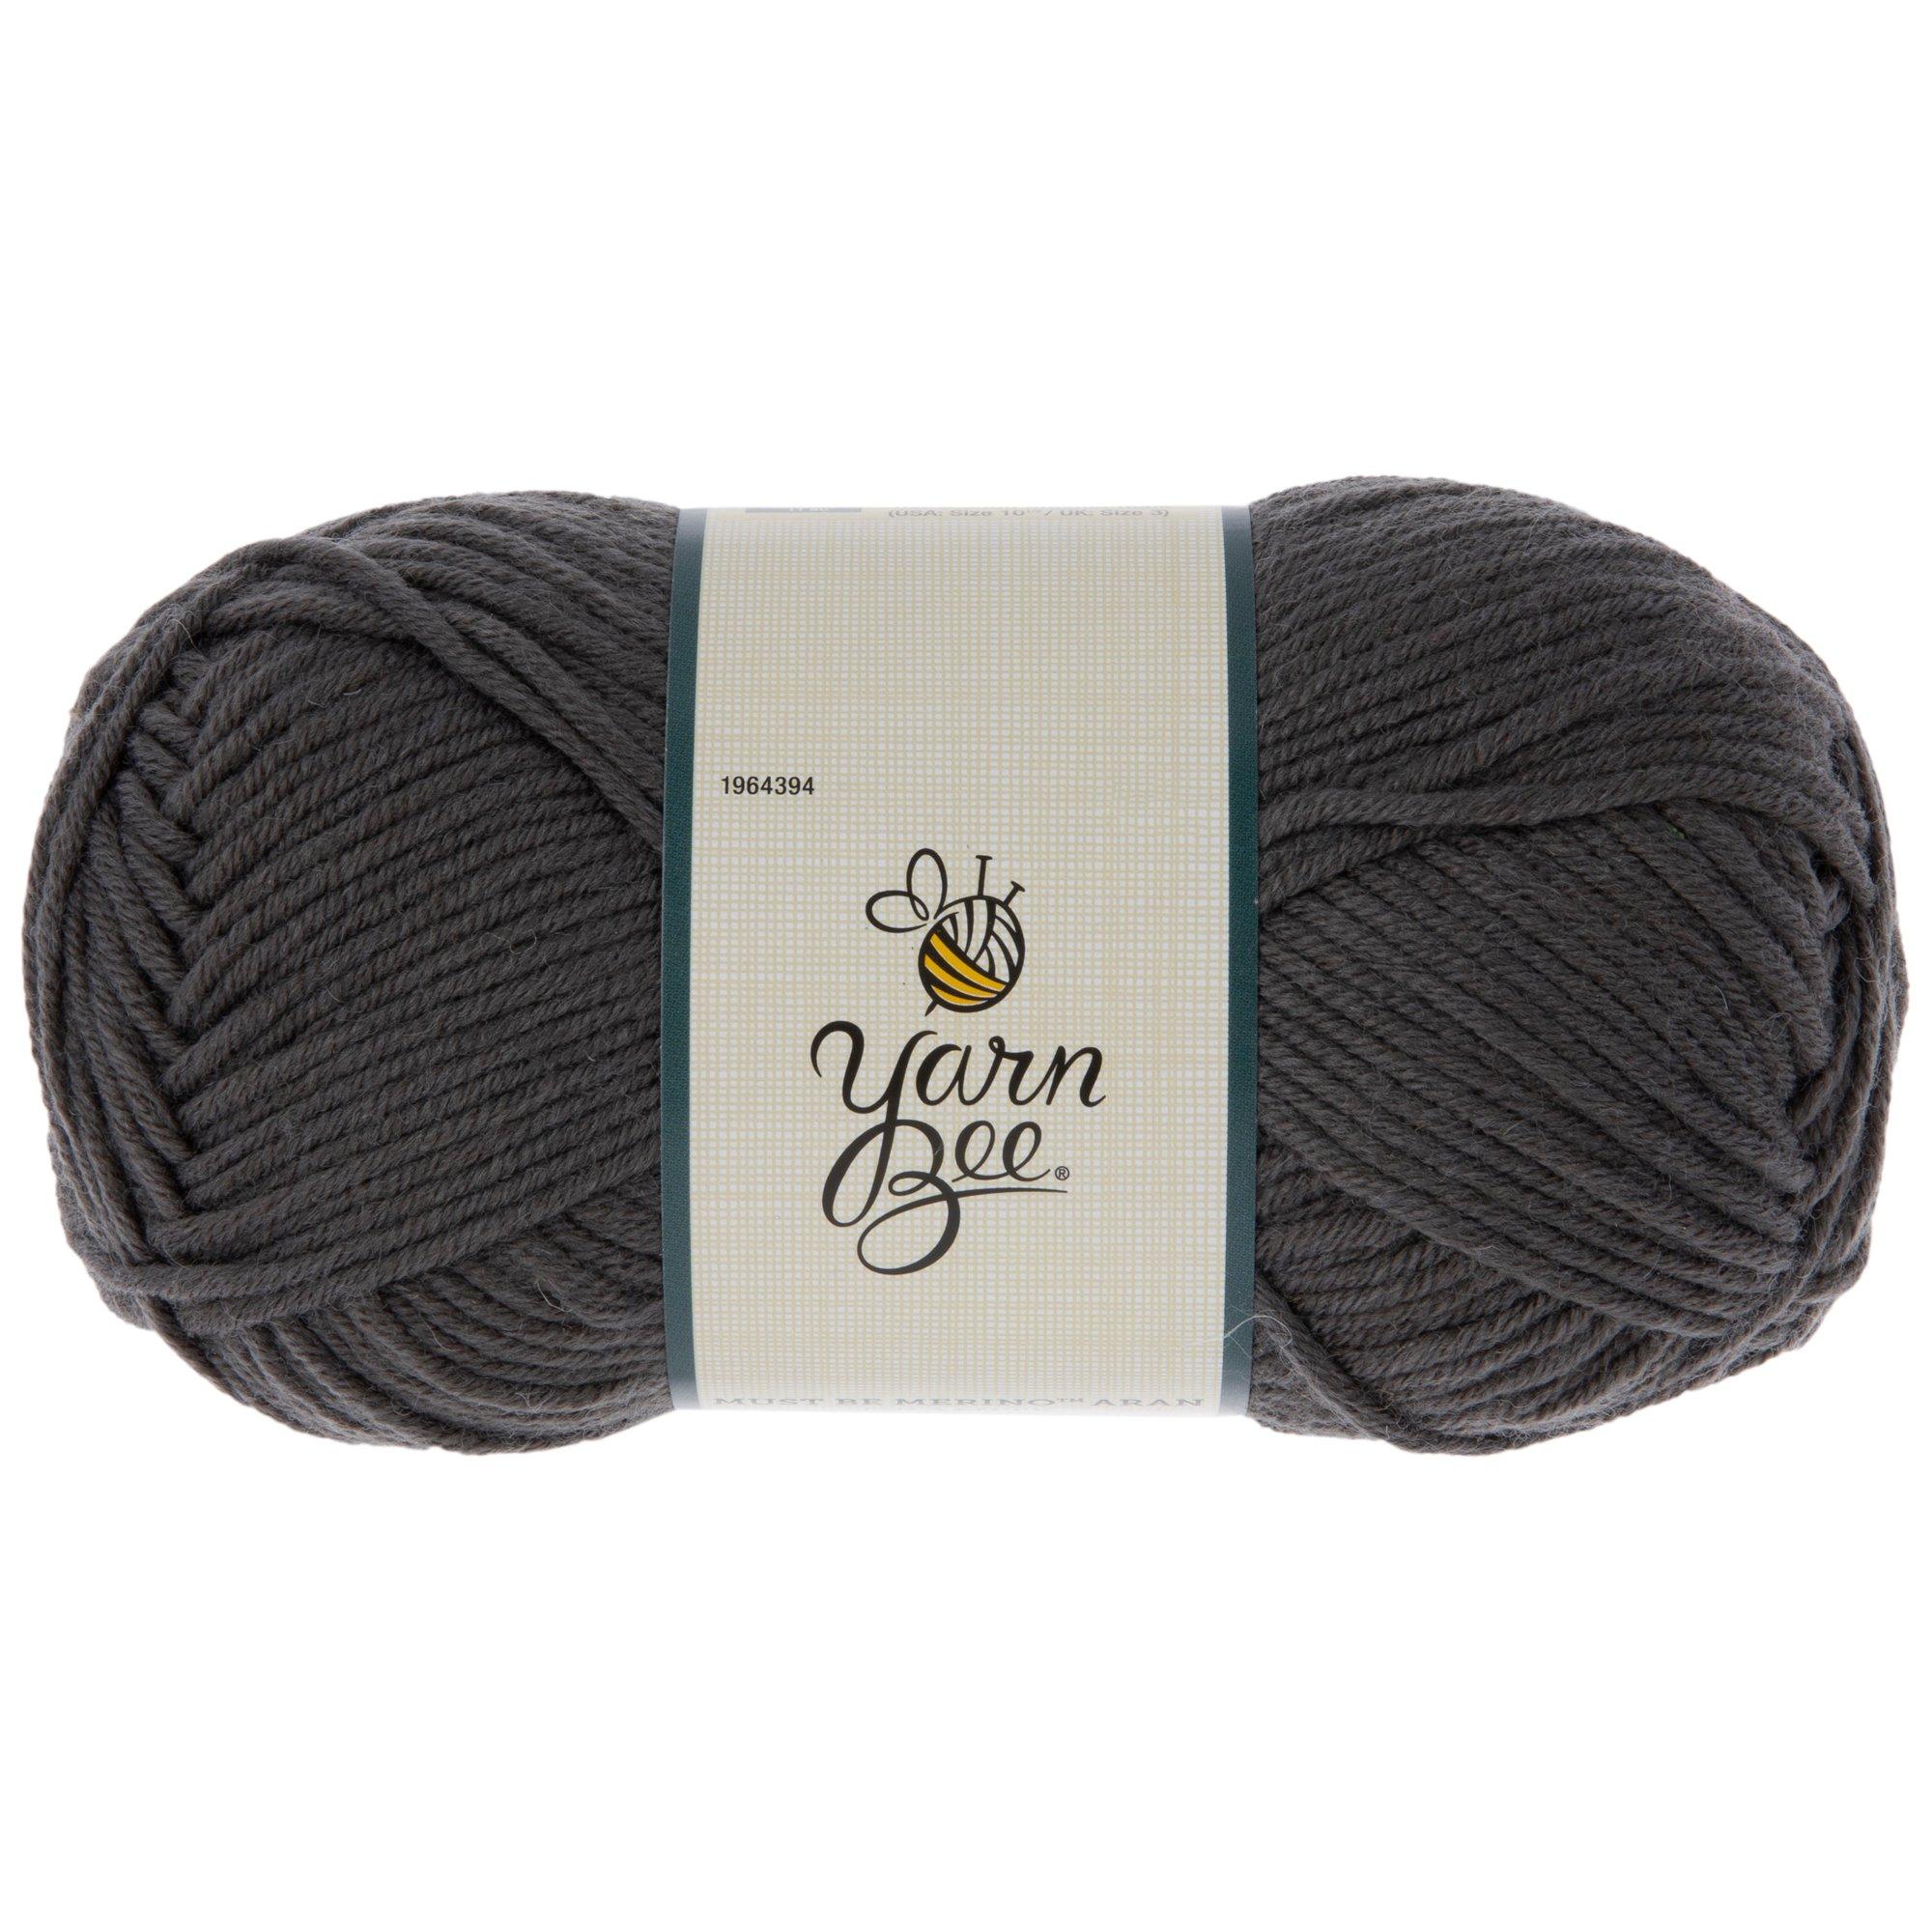 Yarn Bee Soft and Sleek, lot of 3, color Ivory, Navy & Purple